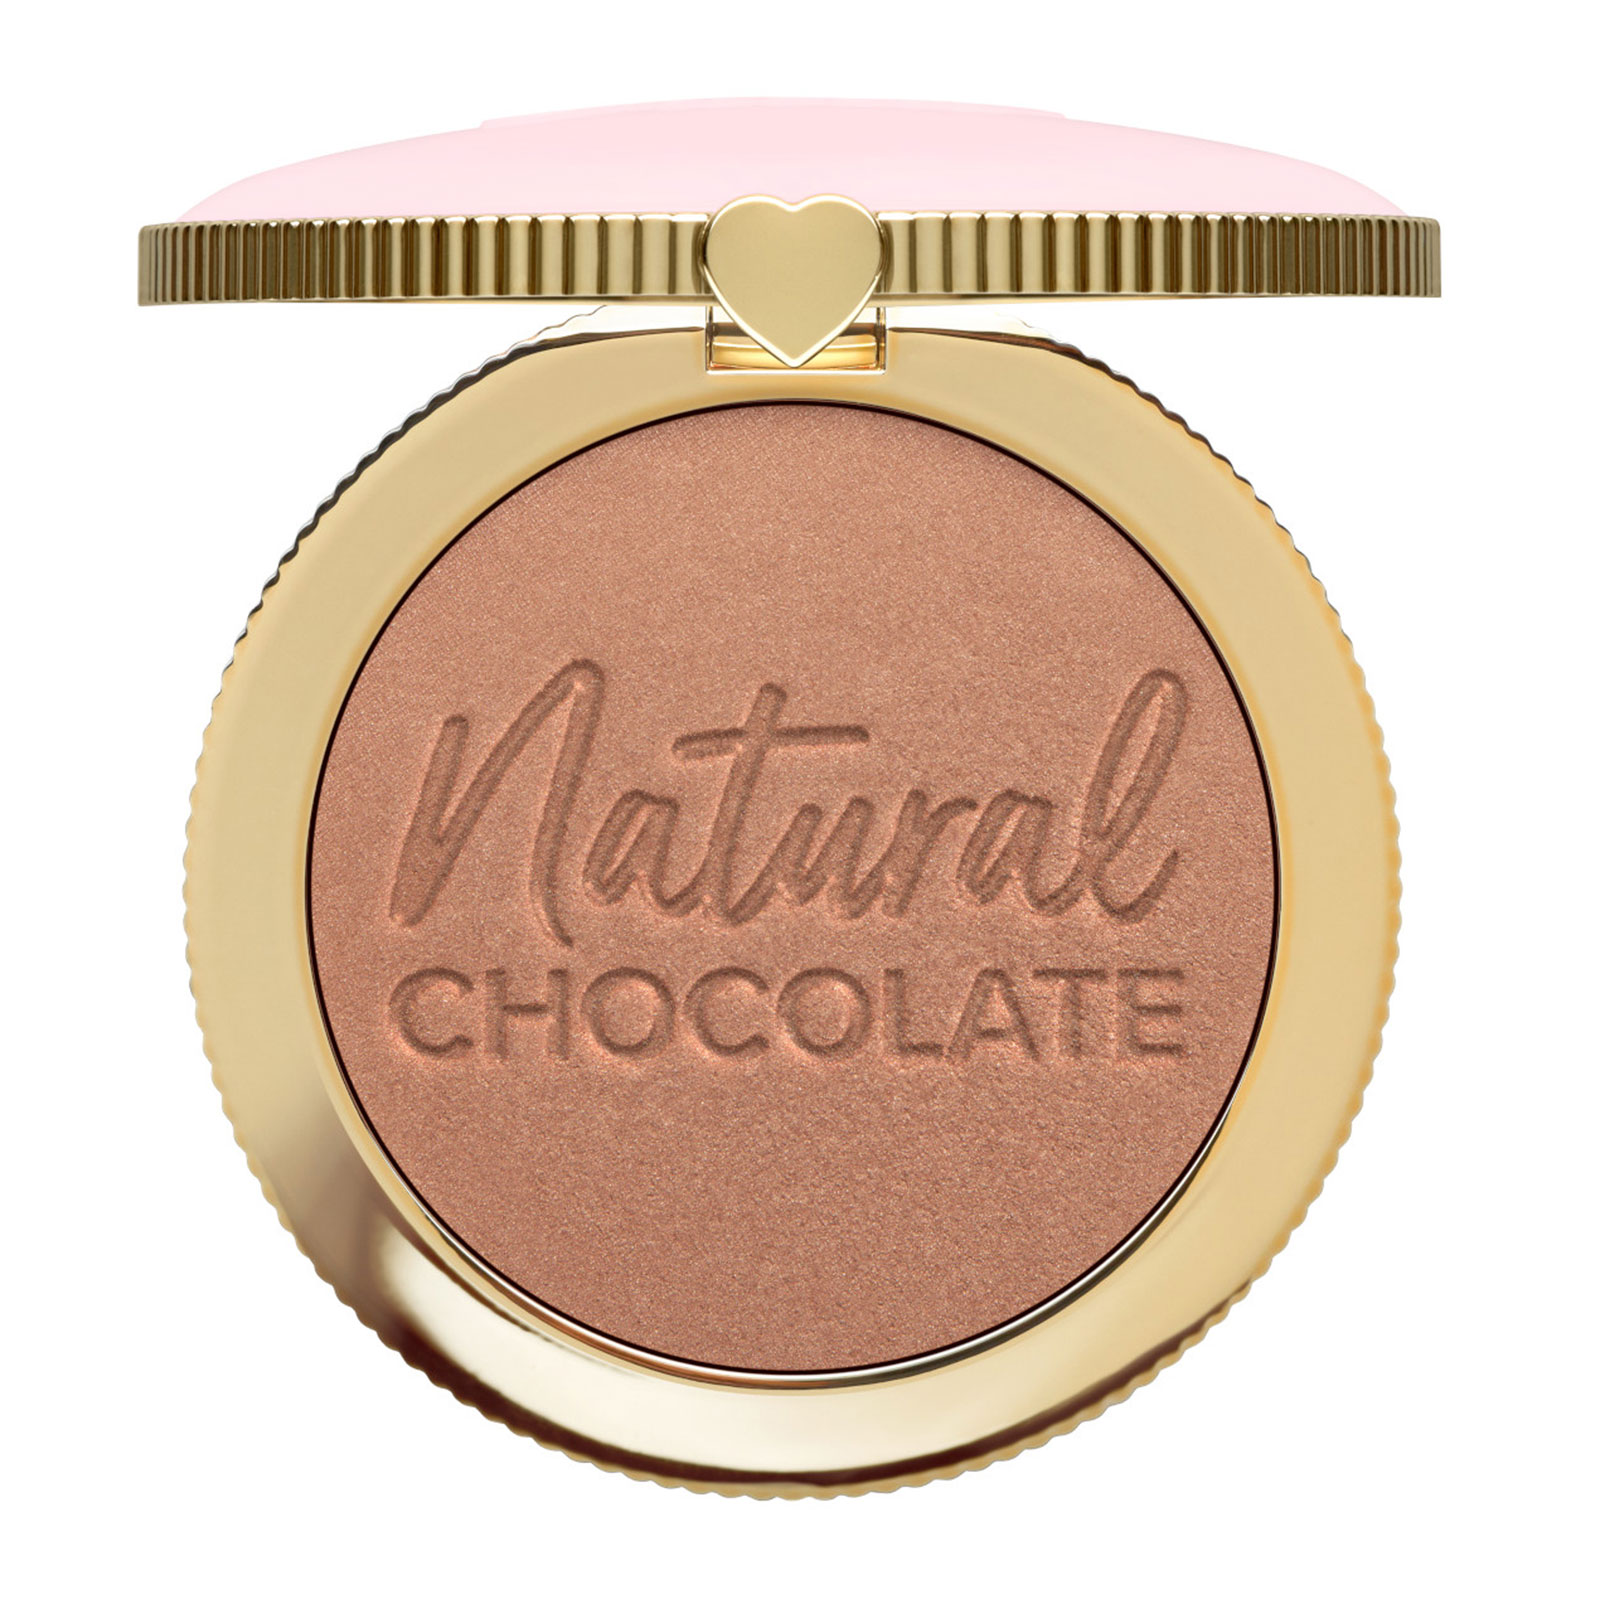 Too Faced Natural Chocolate Bronzer 9G Caramel Cocoa